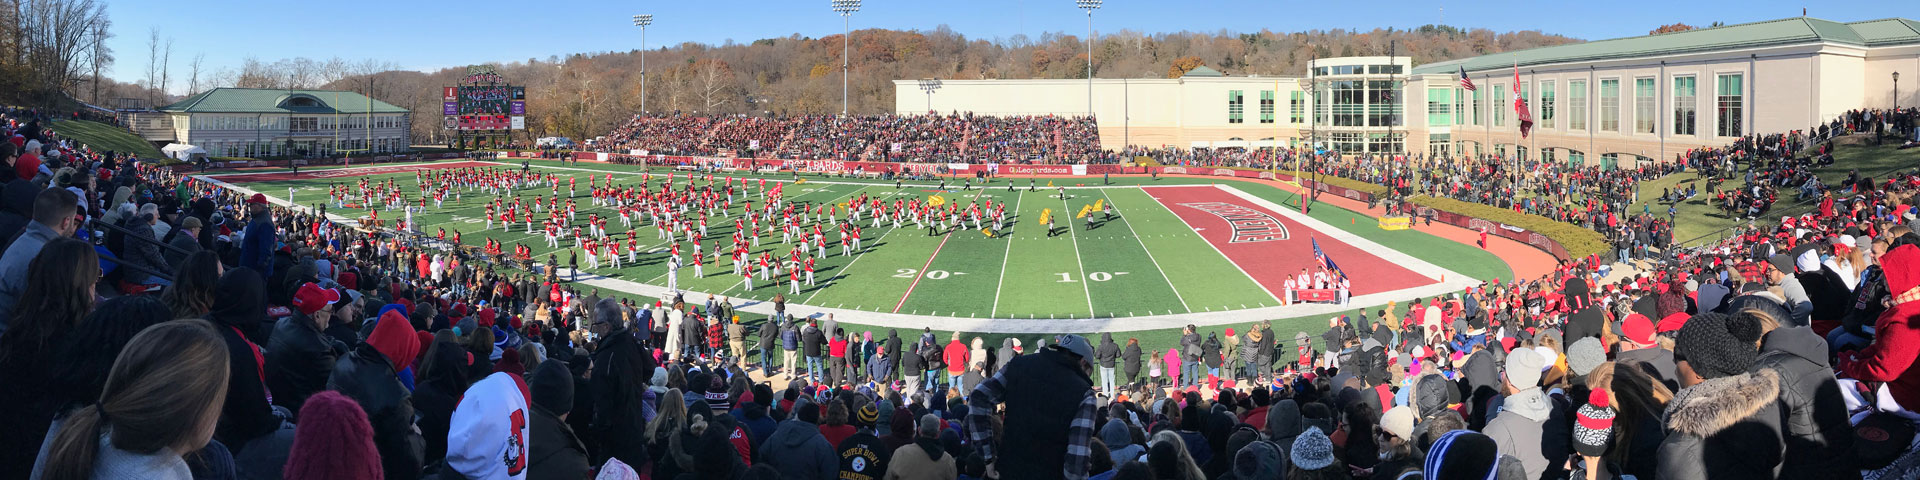 A panoramic view of a football stadium packed with people. A band in red, black, and white uniforms performs on the field.